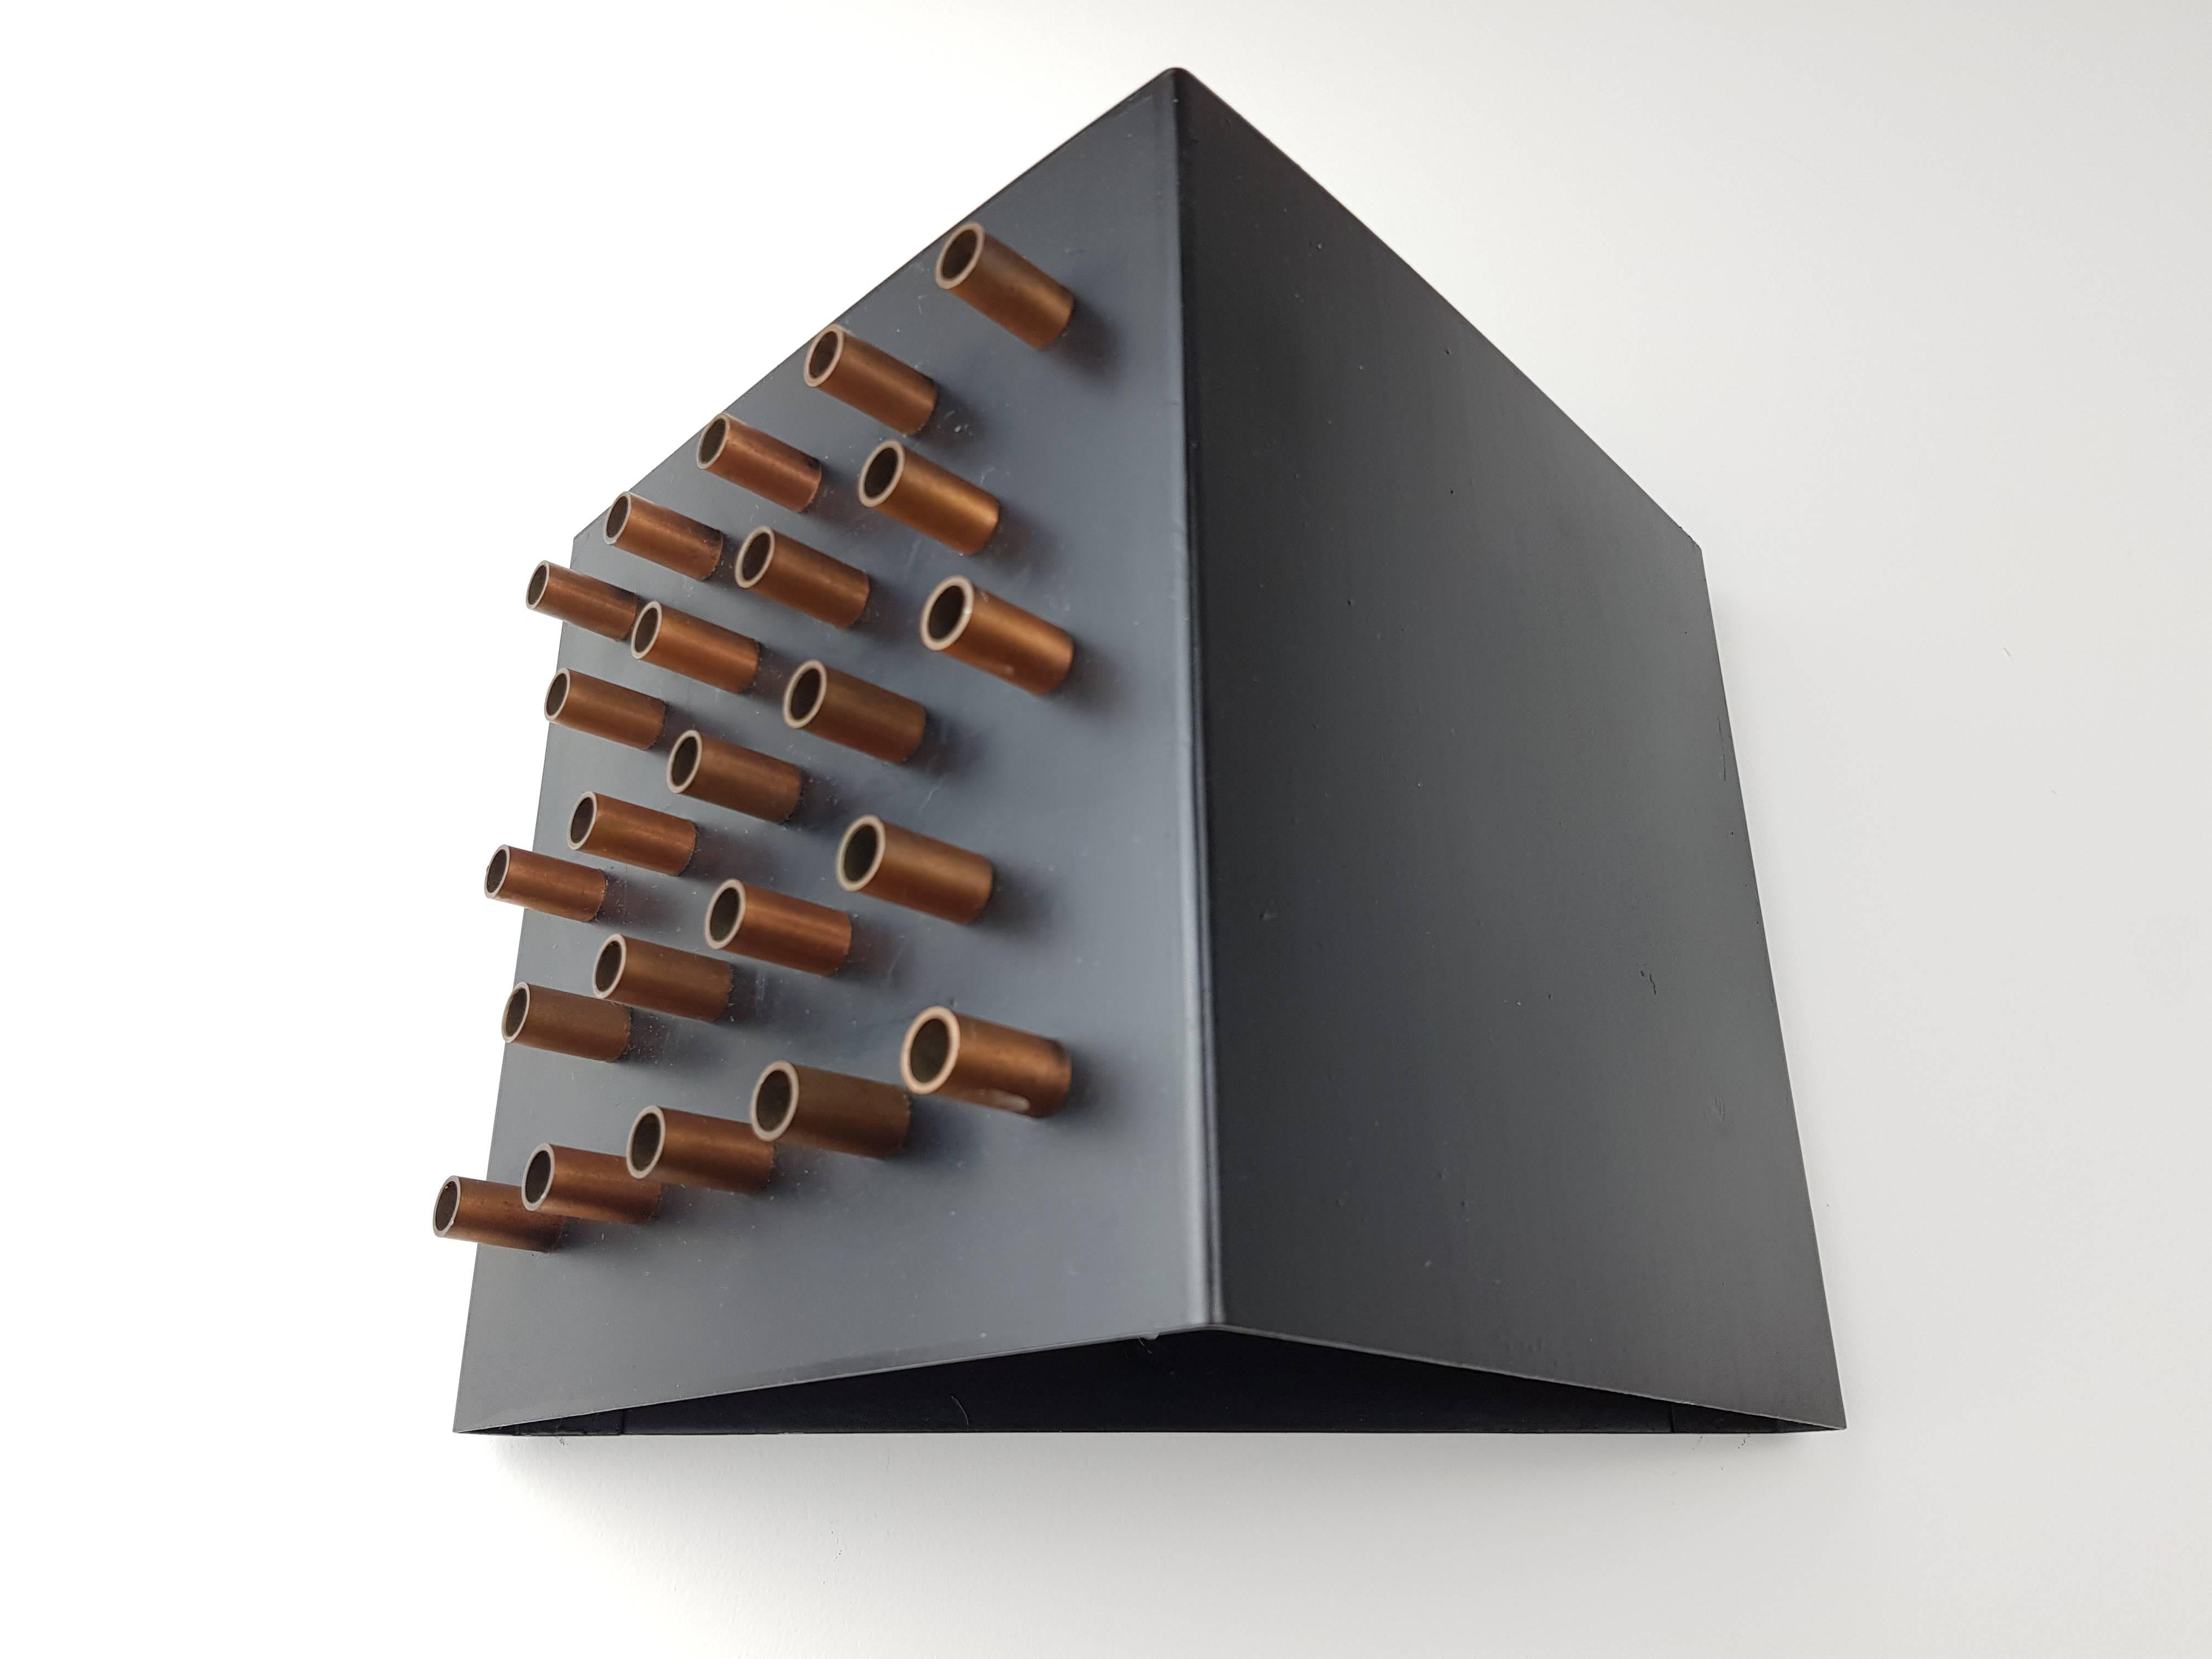 A claar obscur wall sconce by RAAK, Netherlands, 1969

A claar obscur wall sconce by RAAK, a great piece of minimalist design, 1969. Copper pipe and black triangular frame.

Condition: Fully working, rewired, safety tested & passed - E27 / E26